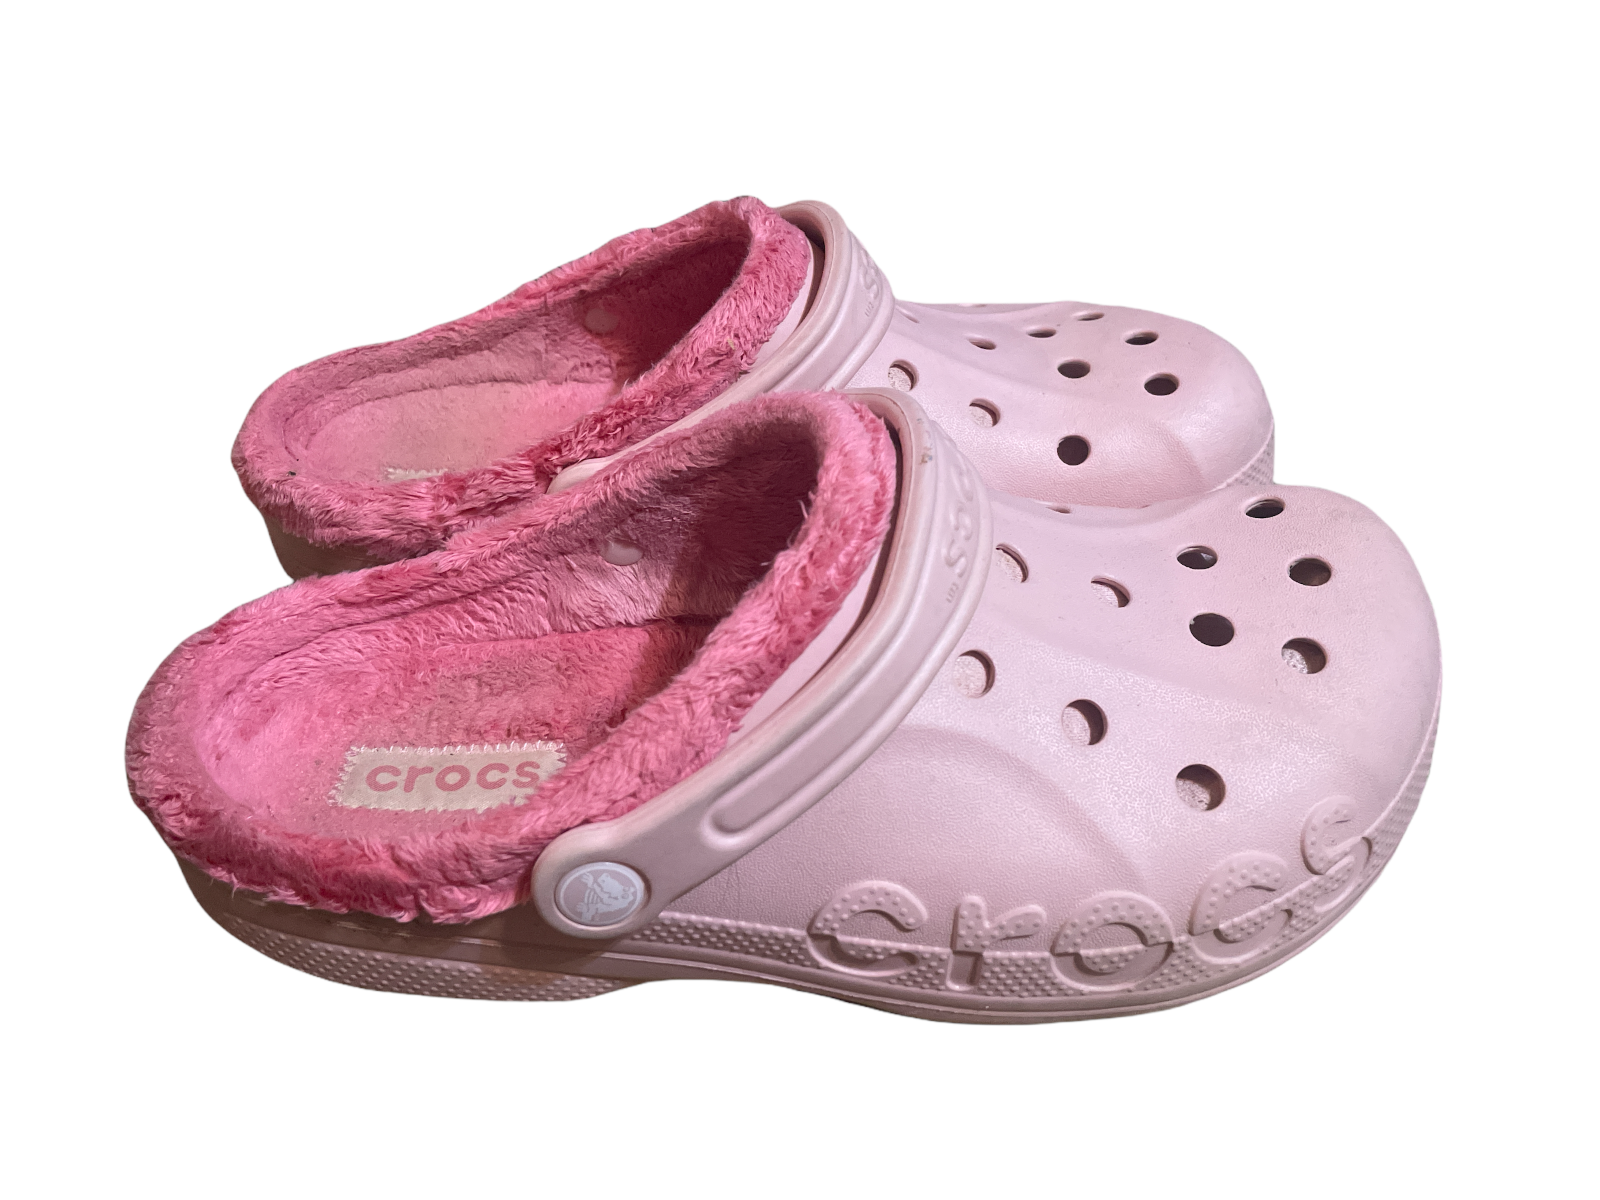 Classic Crocs Pink Faux Fur Lined Dual and 50 similar items